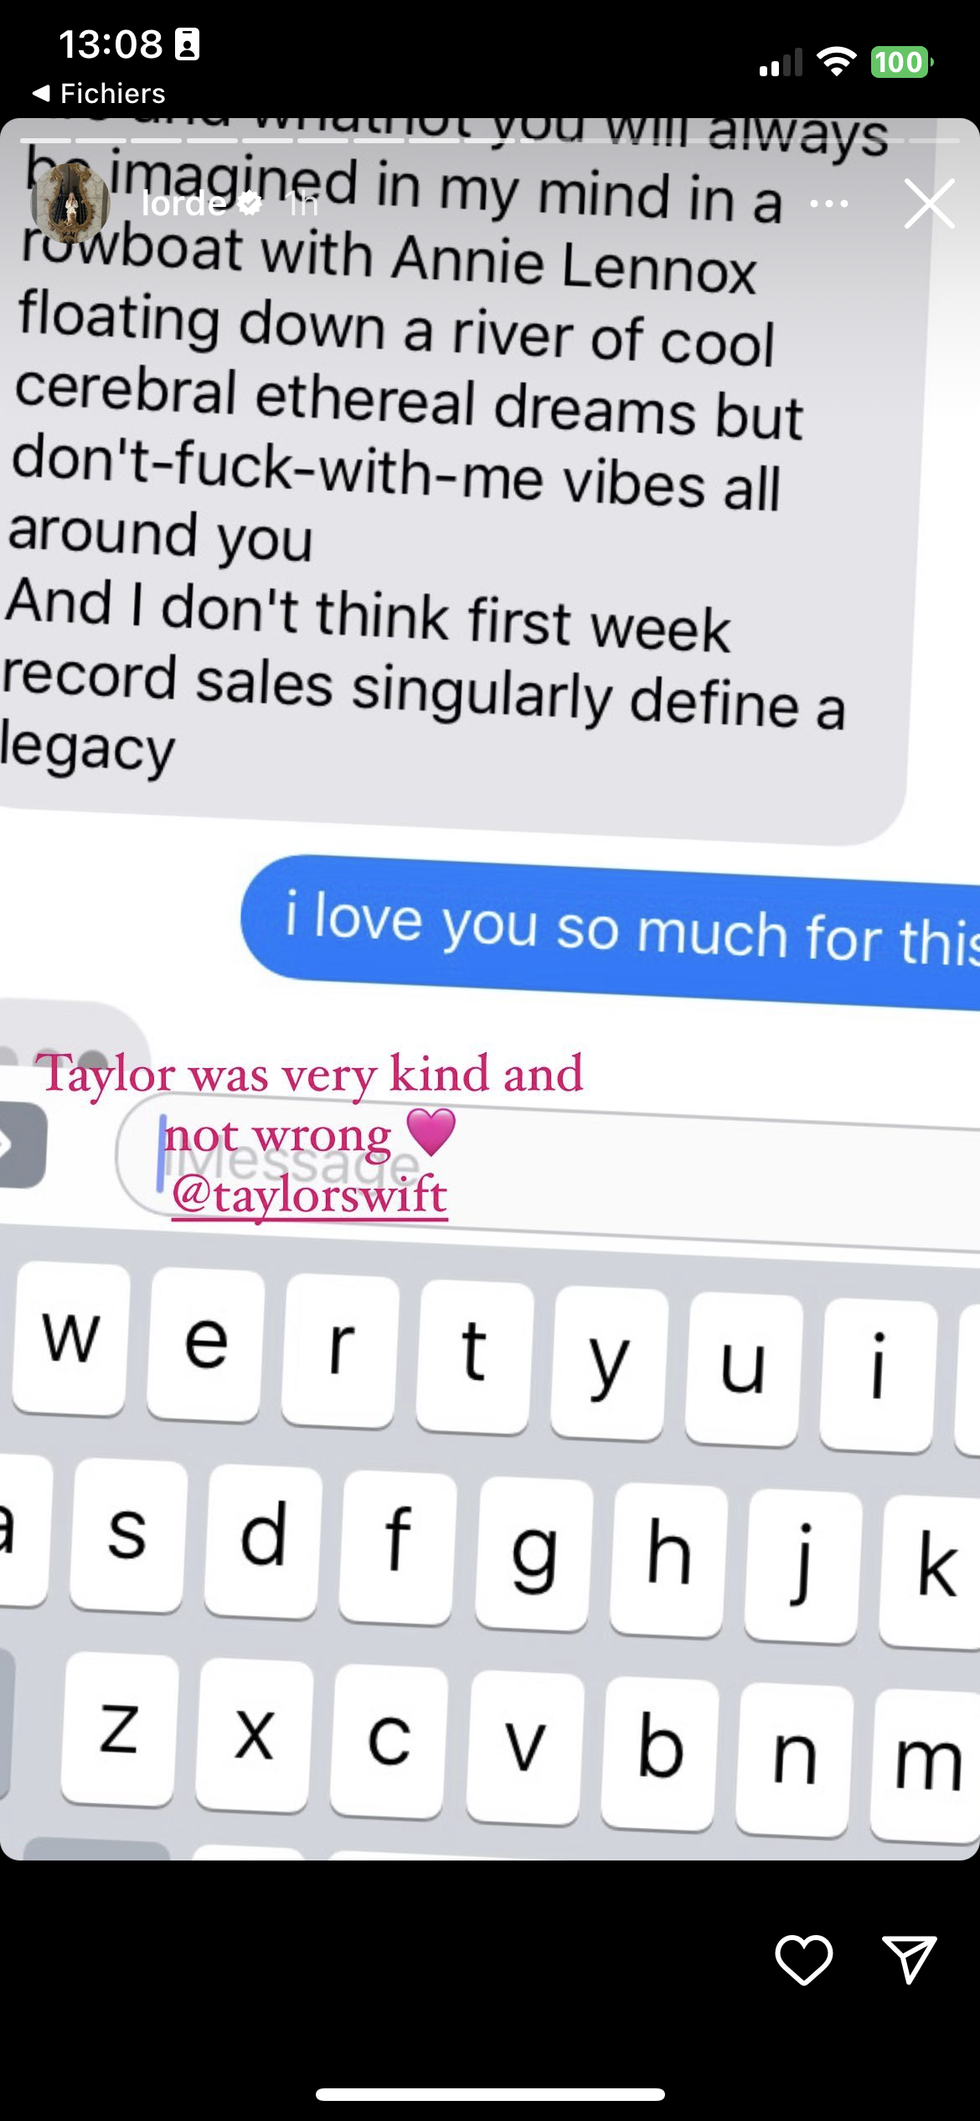 taylor swift's text to lorde